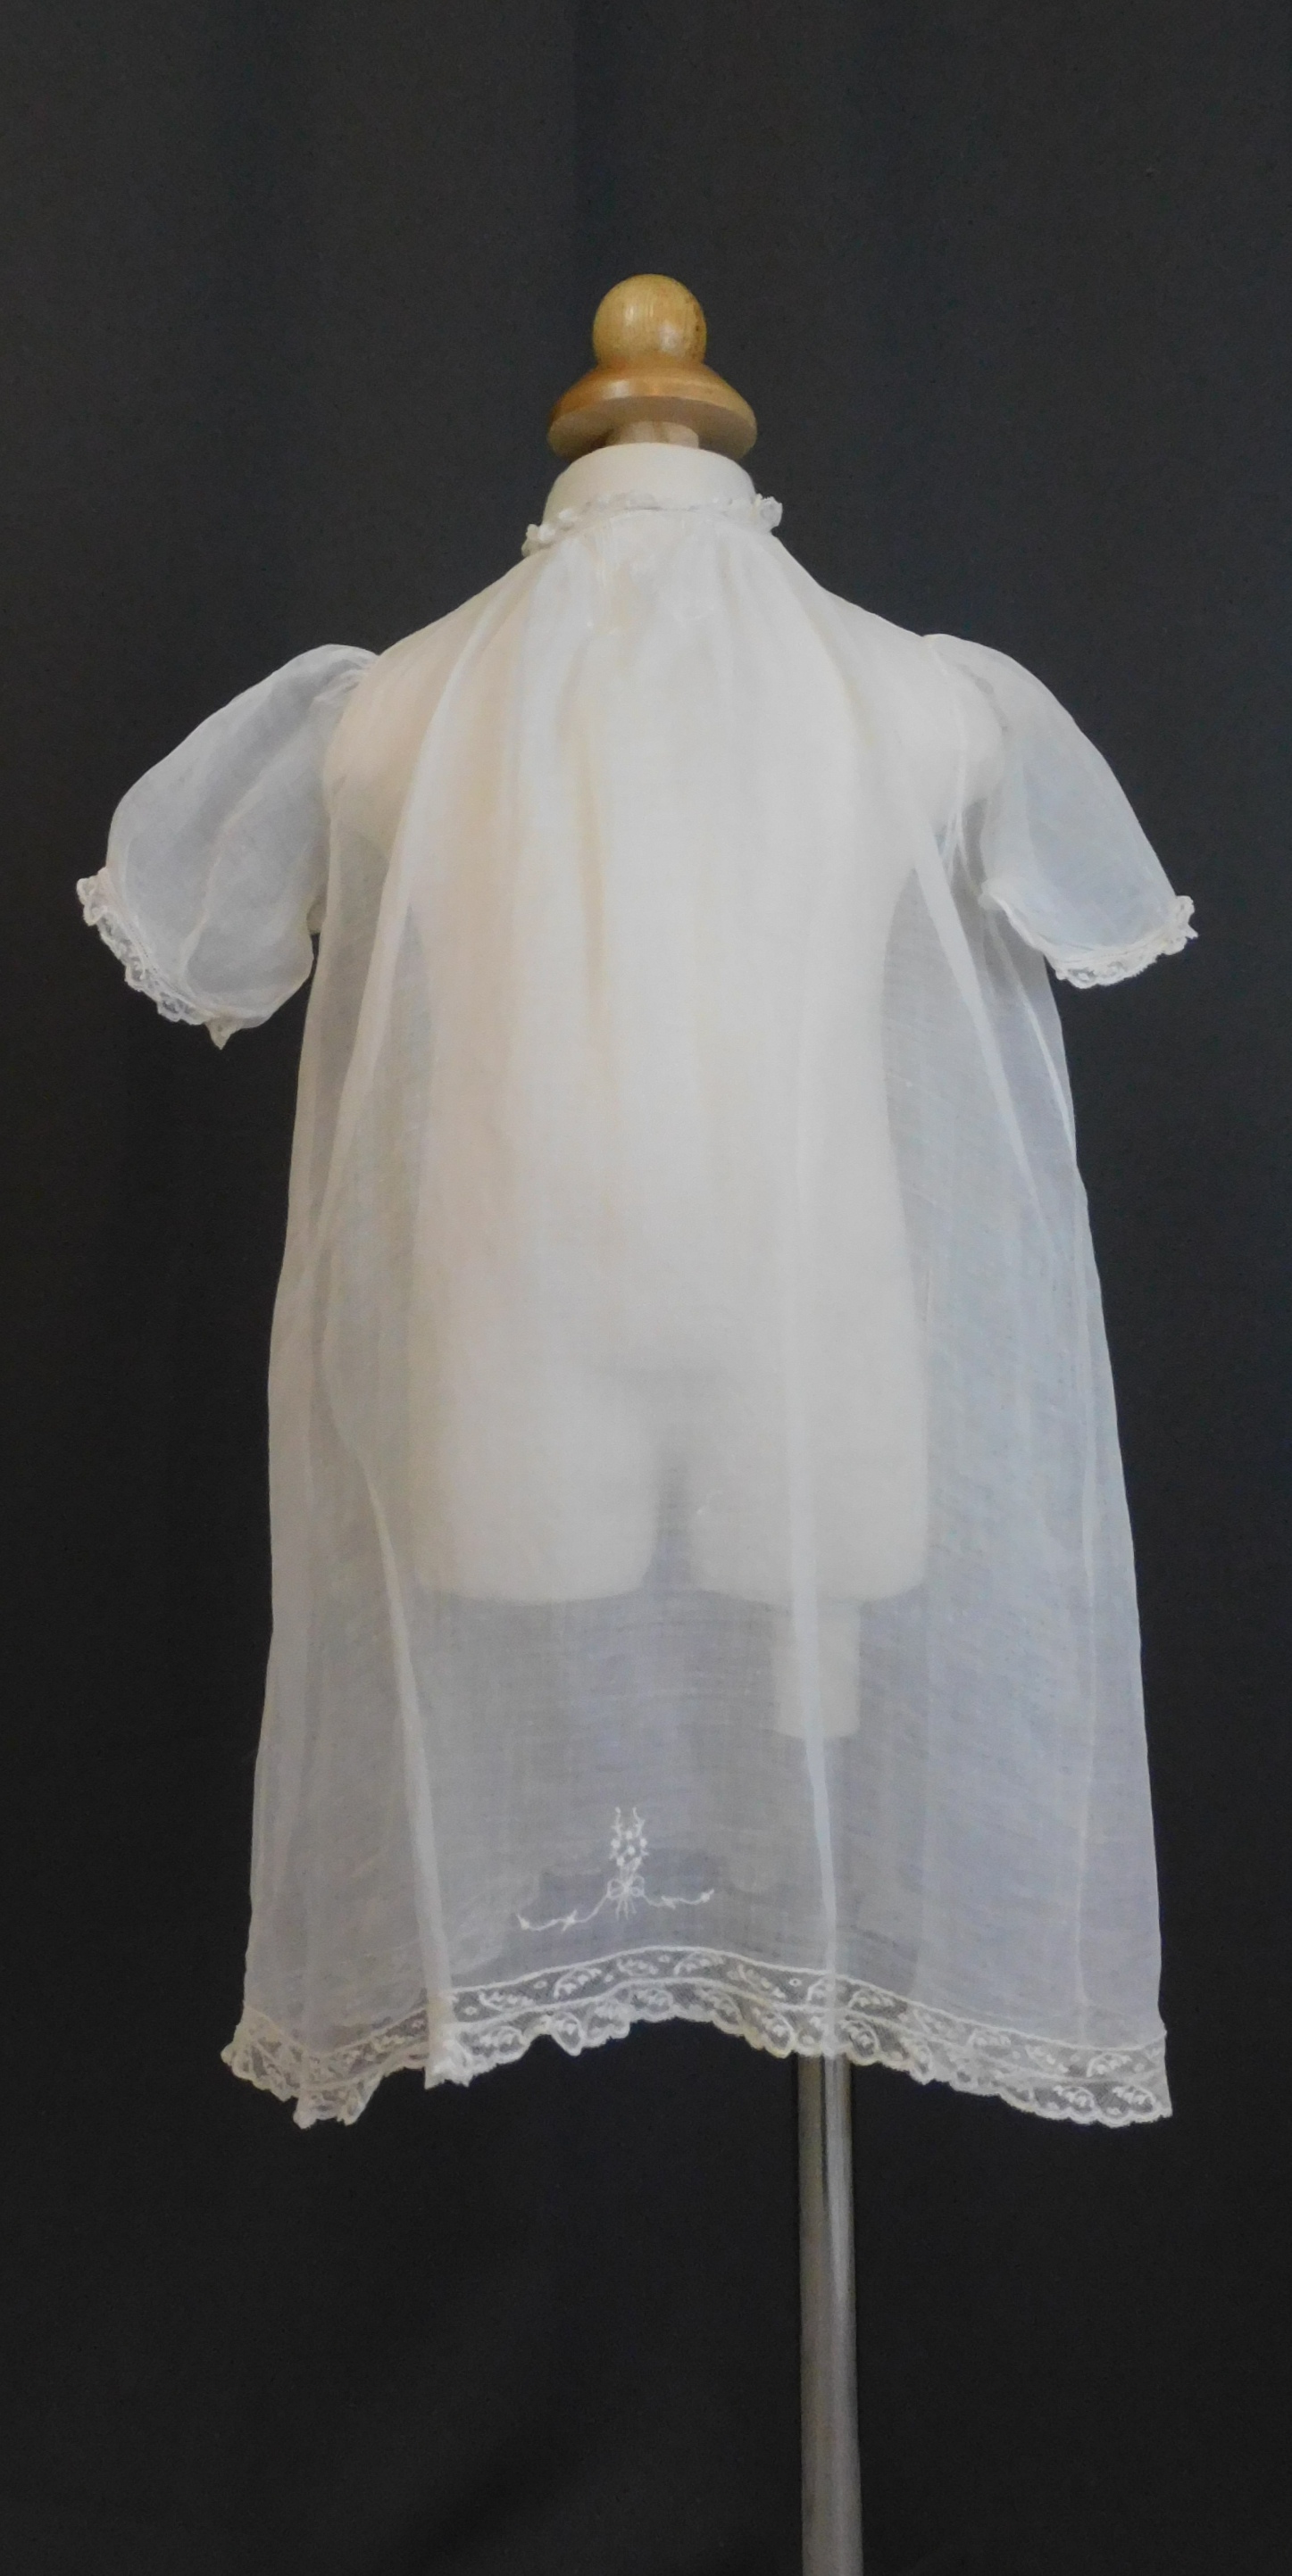 Vintage Sheer Cotton Baby Infant Gown, 1930s, 19 inches long, 24 inch chest, all hand sewn, embroidered bows, large doll